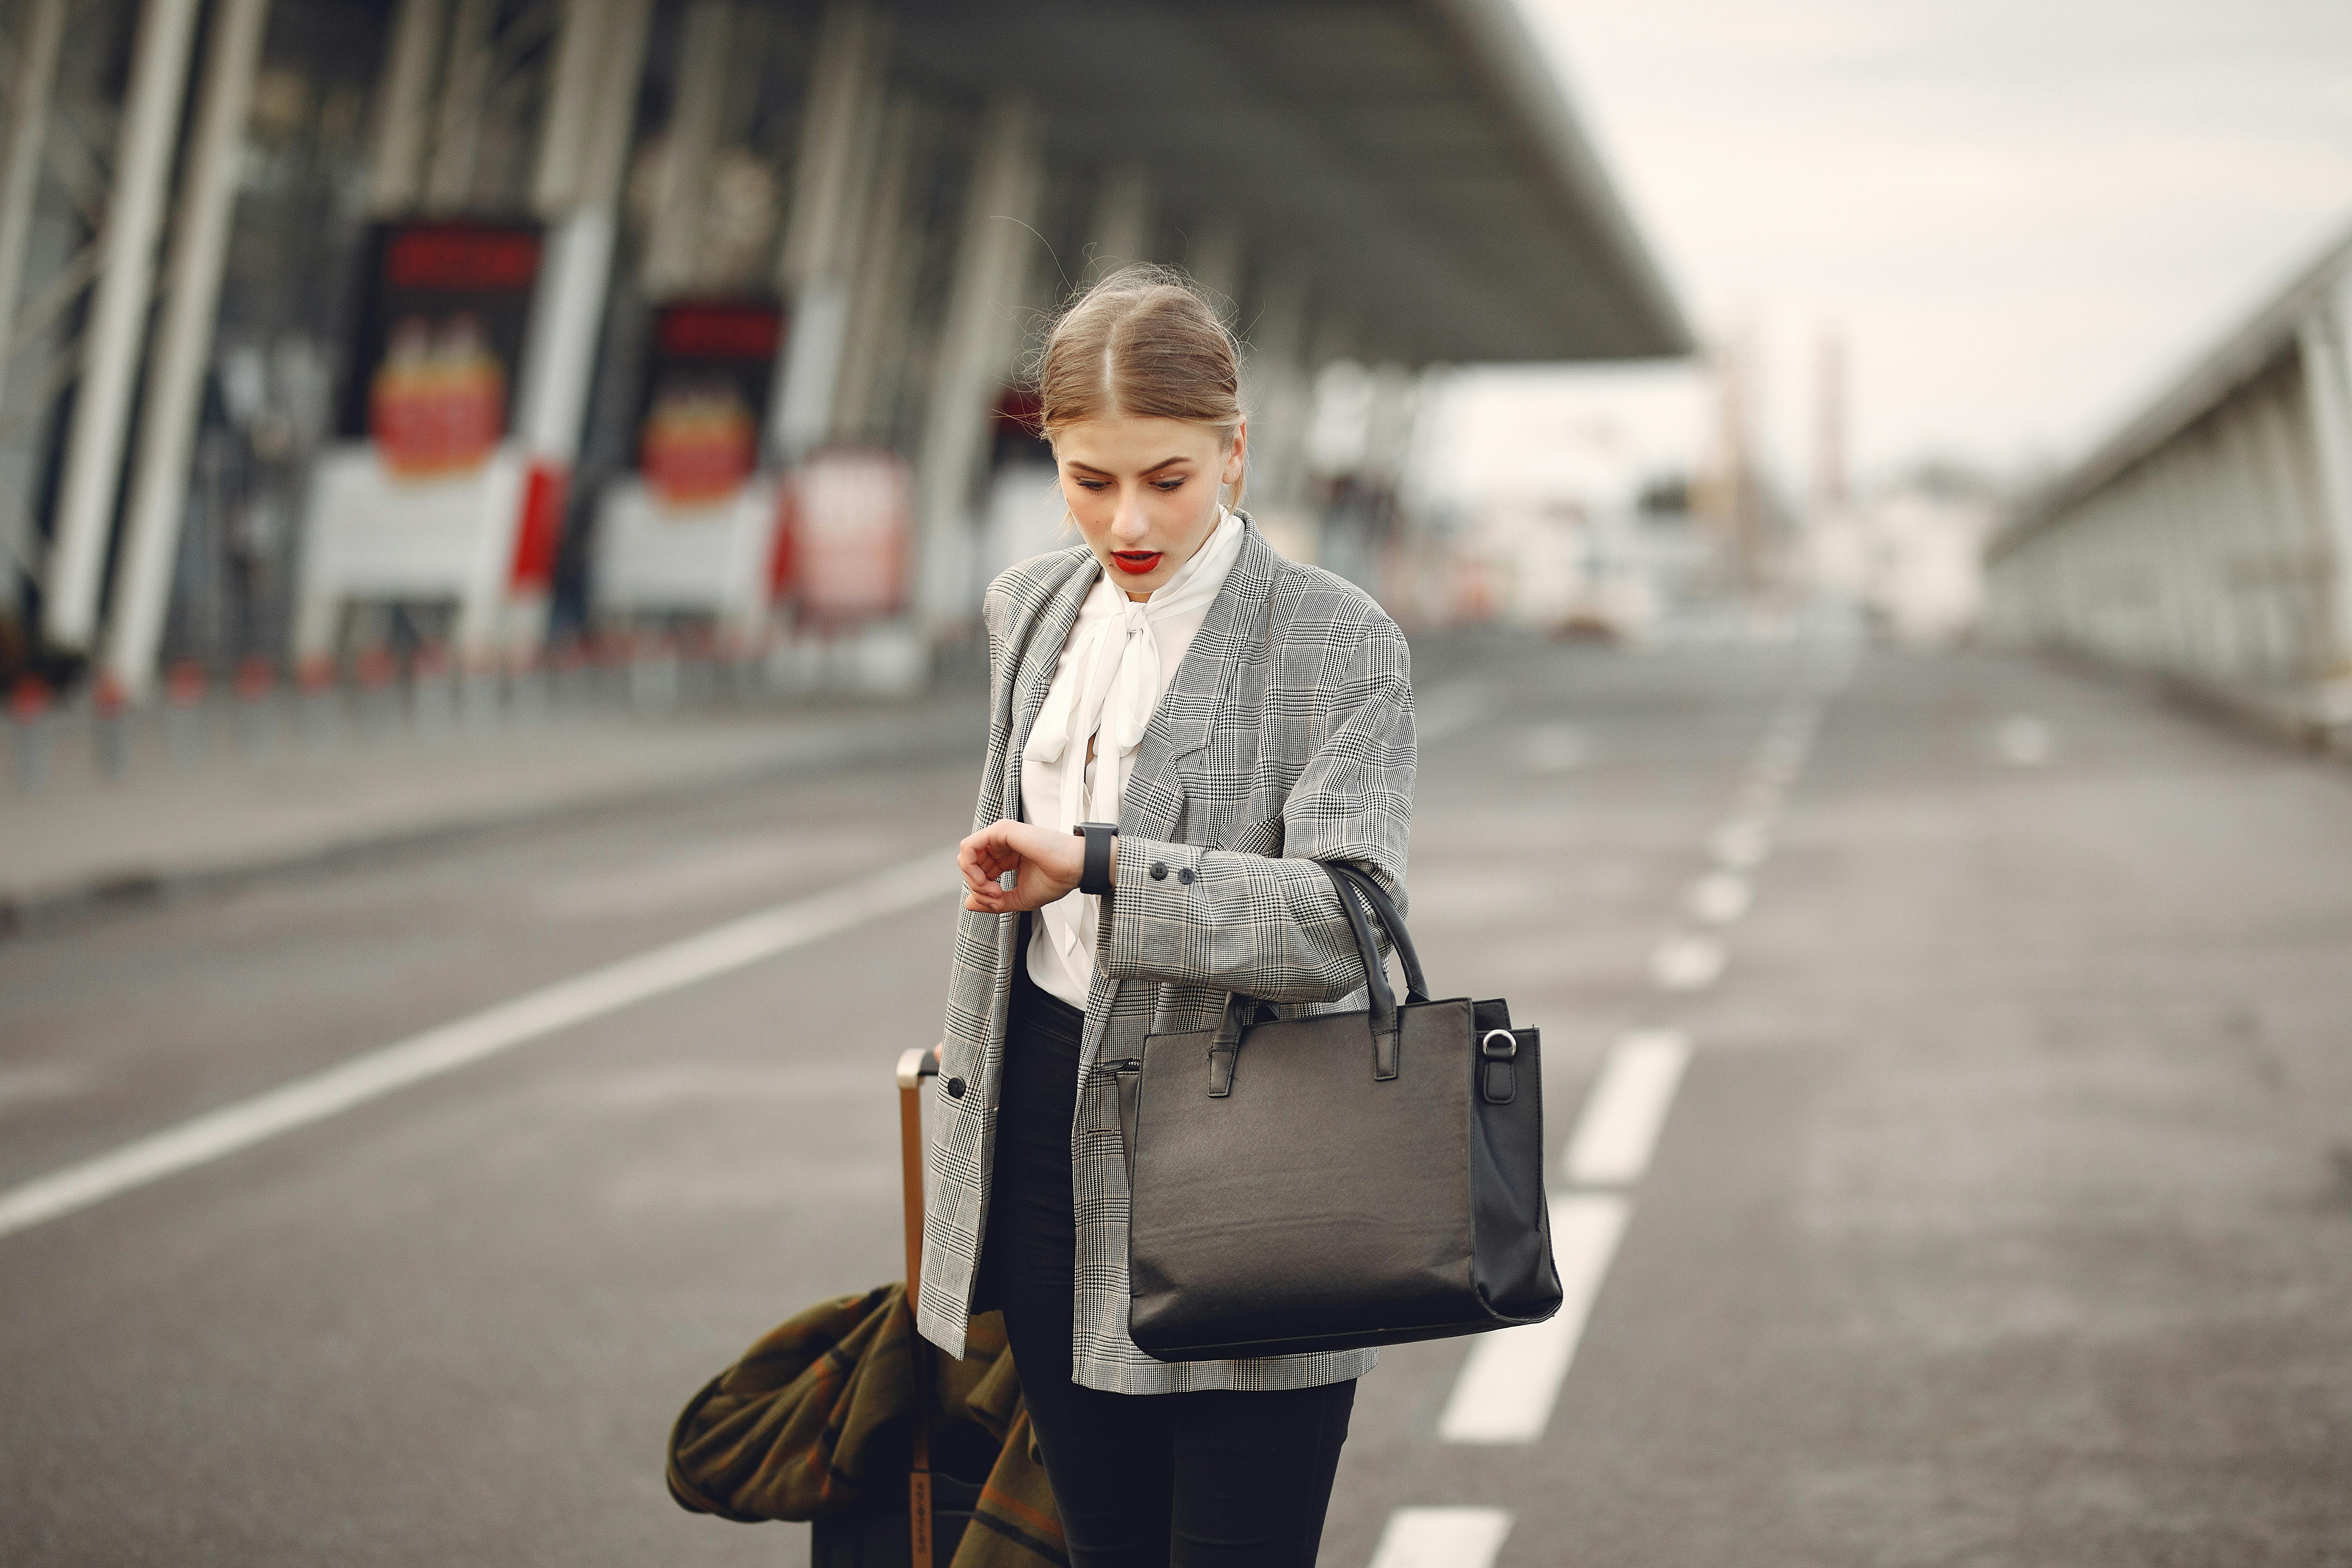 Check-In Champ: Tips for Efficient Airport Check-In